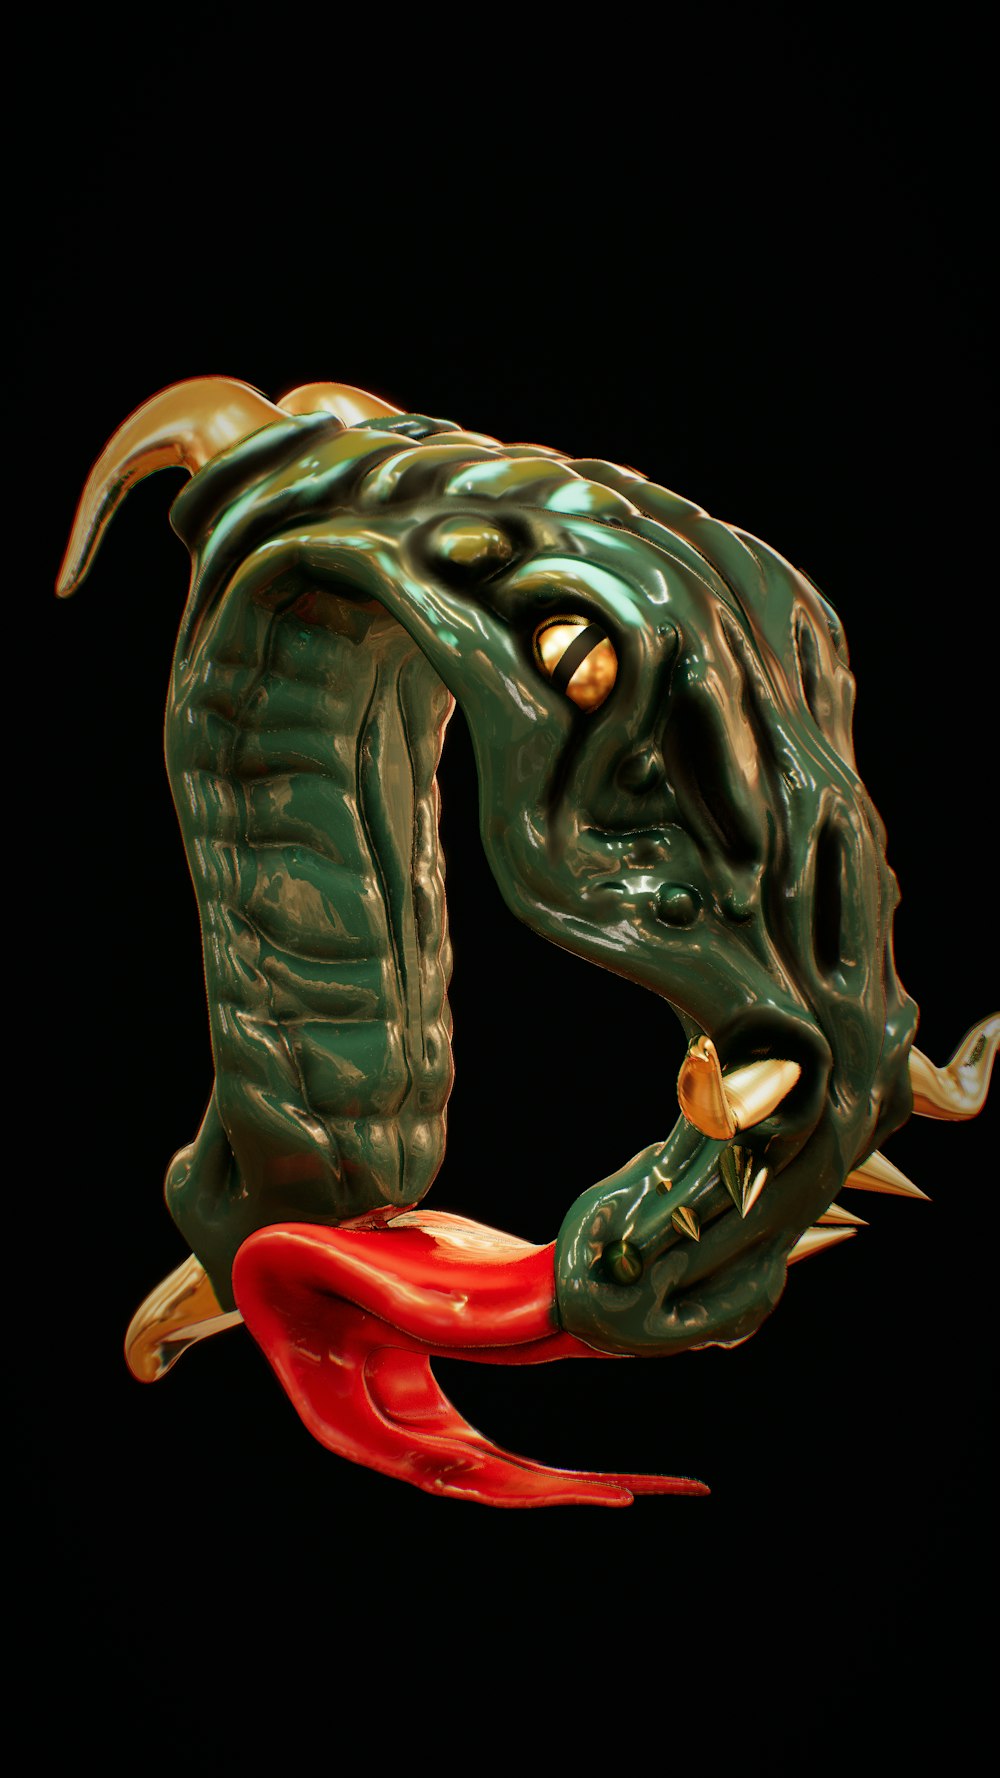 a close up of a dragon head on a black background